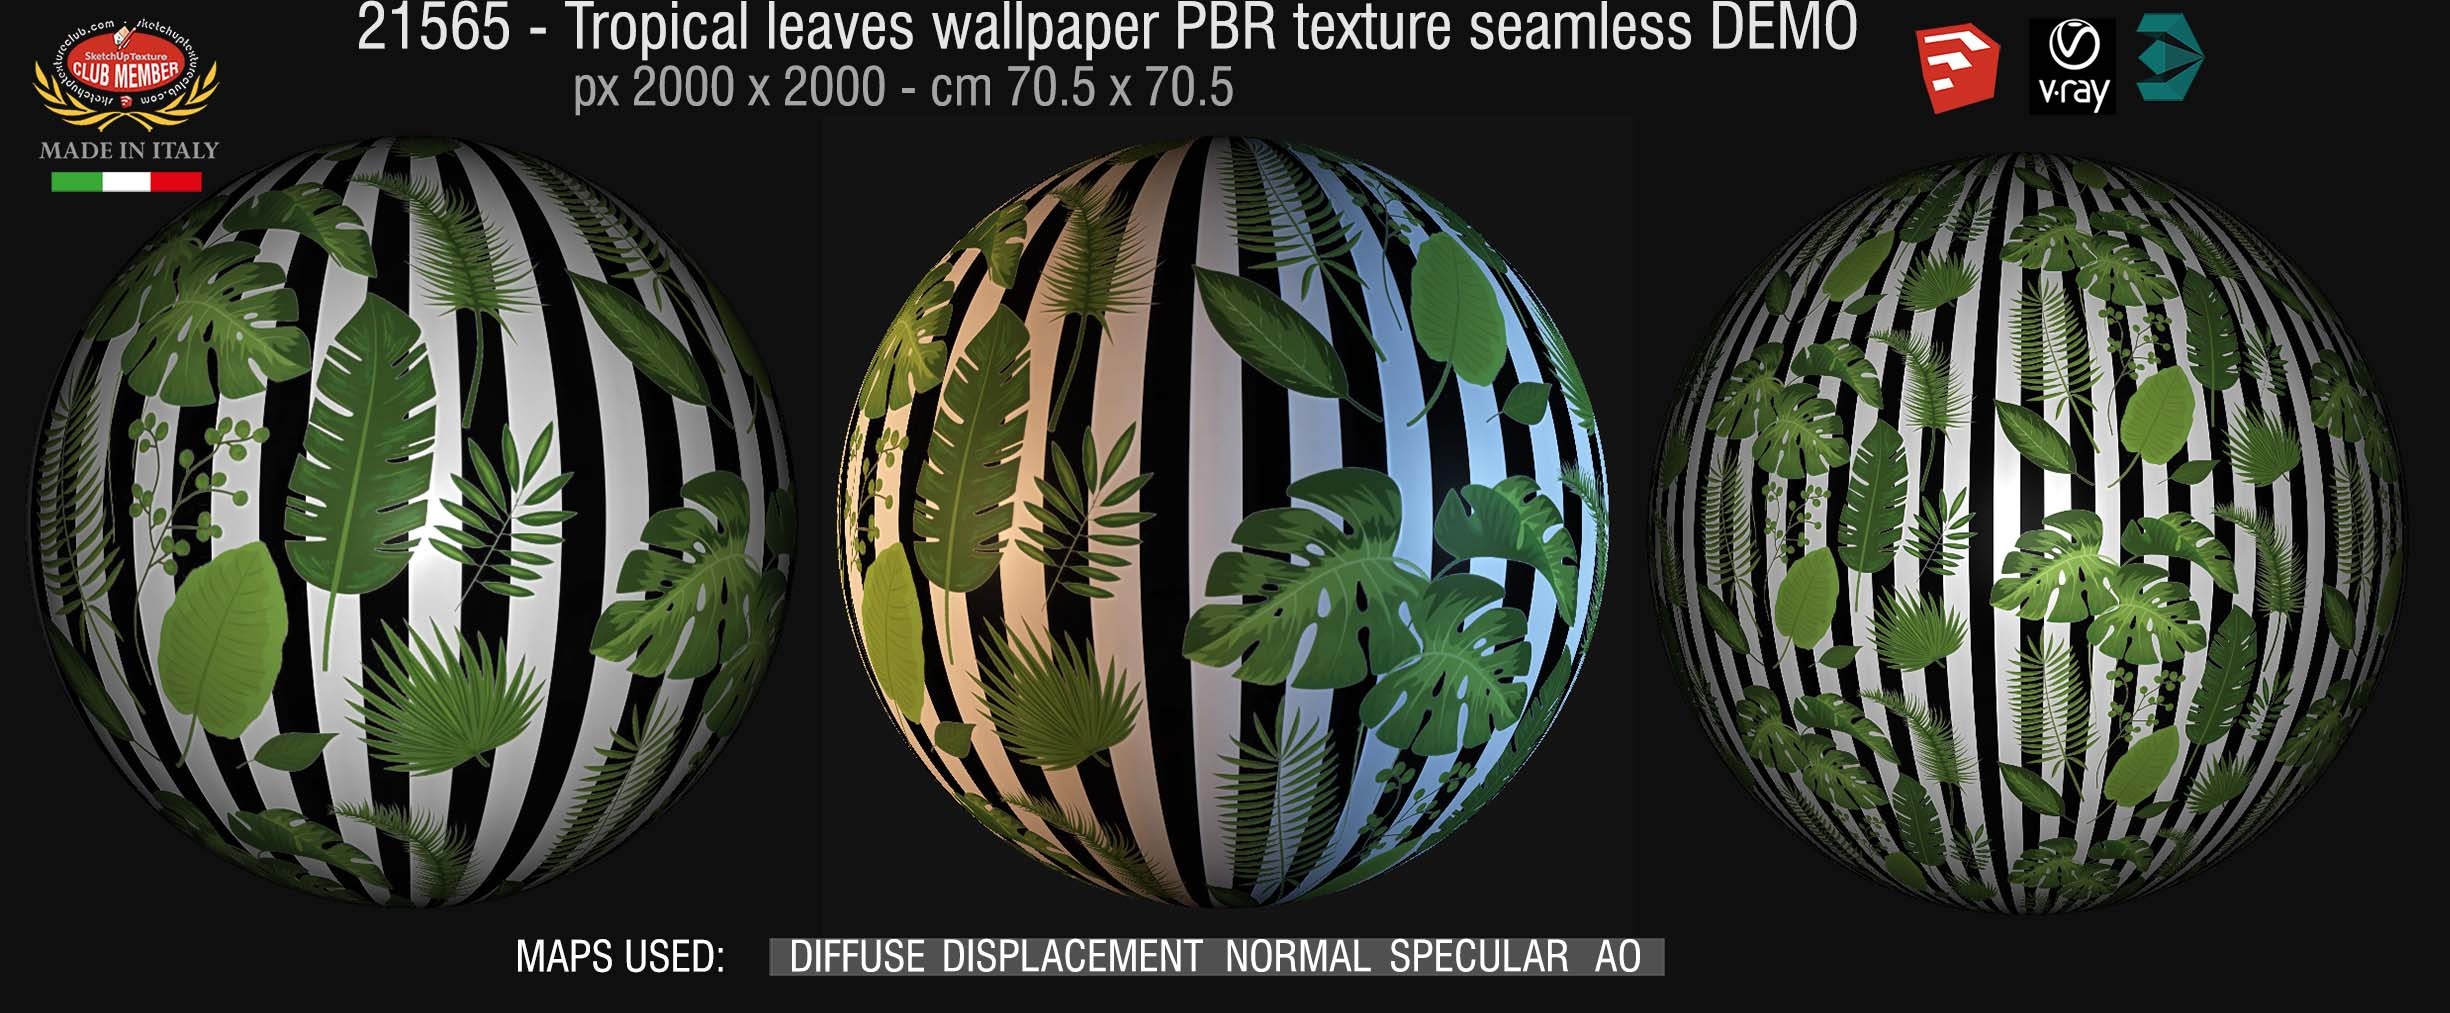 21565 tropical leaves wallpaper PBR texture seamless